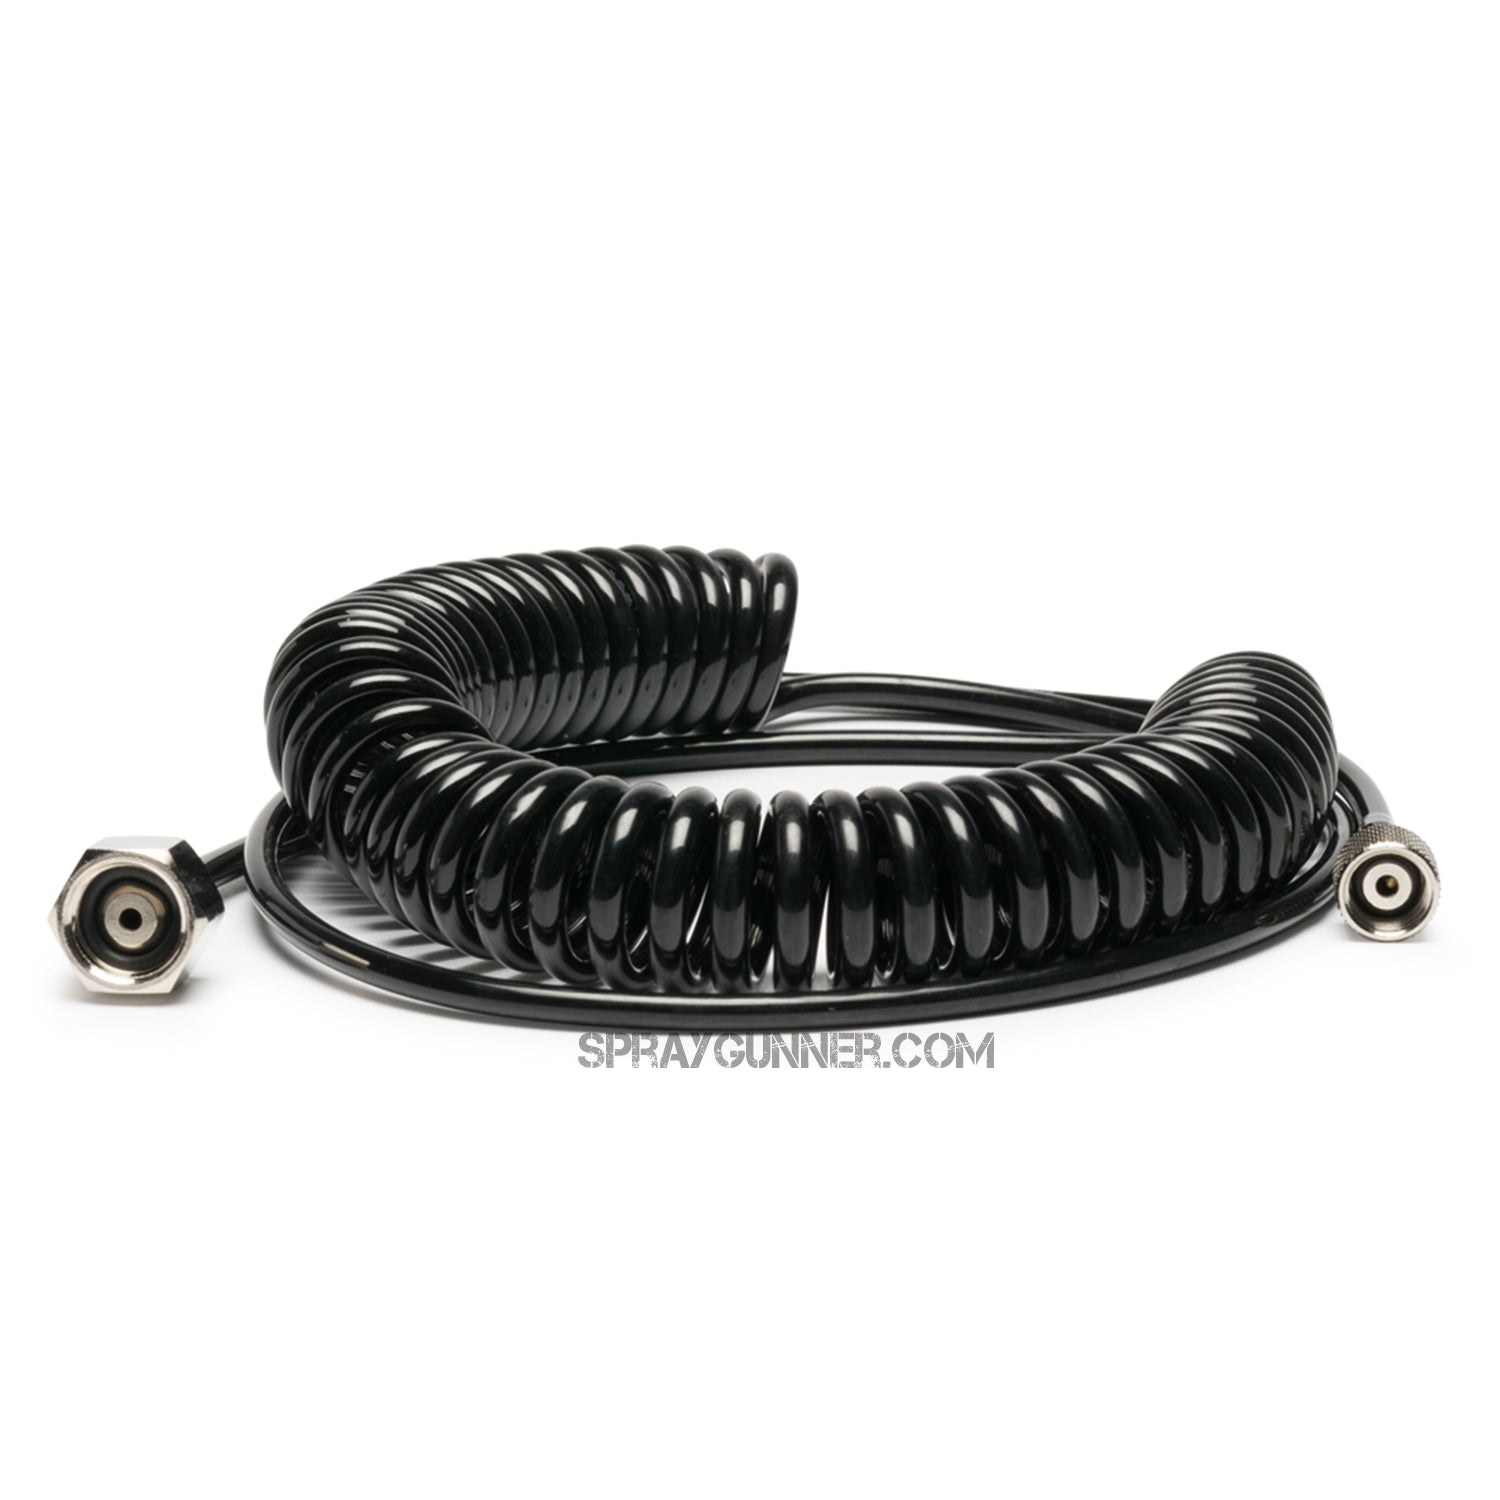 Iwata 10' Cobra Coil Airbrush Hose with Iwata Airbrush Fitting and 1/4" Compressor Fitting Iwata